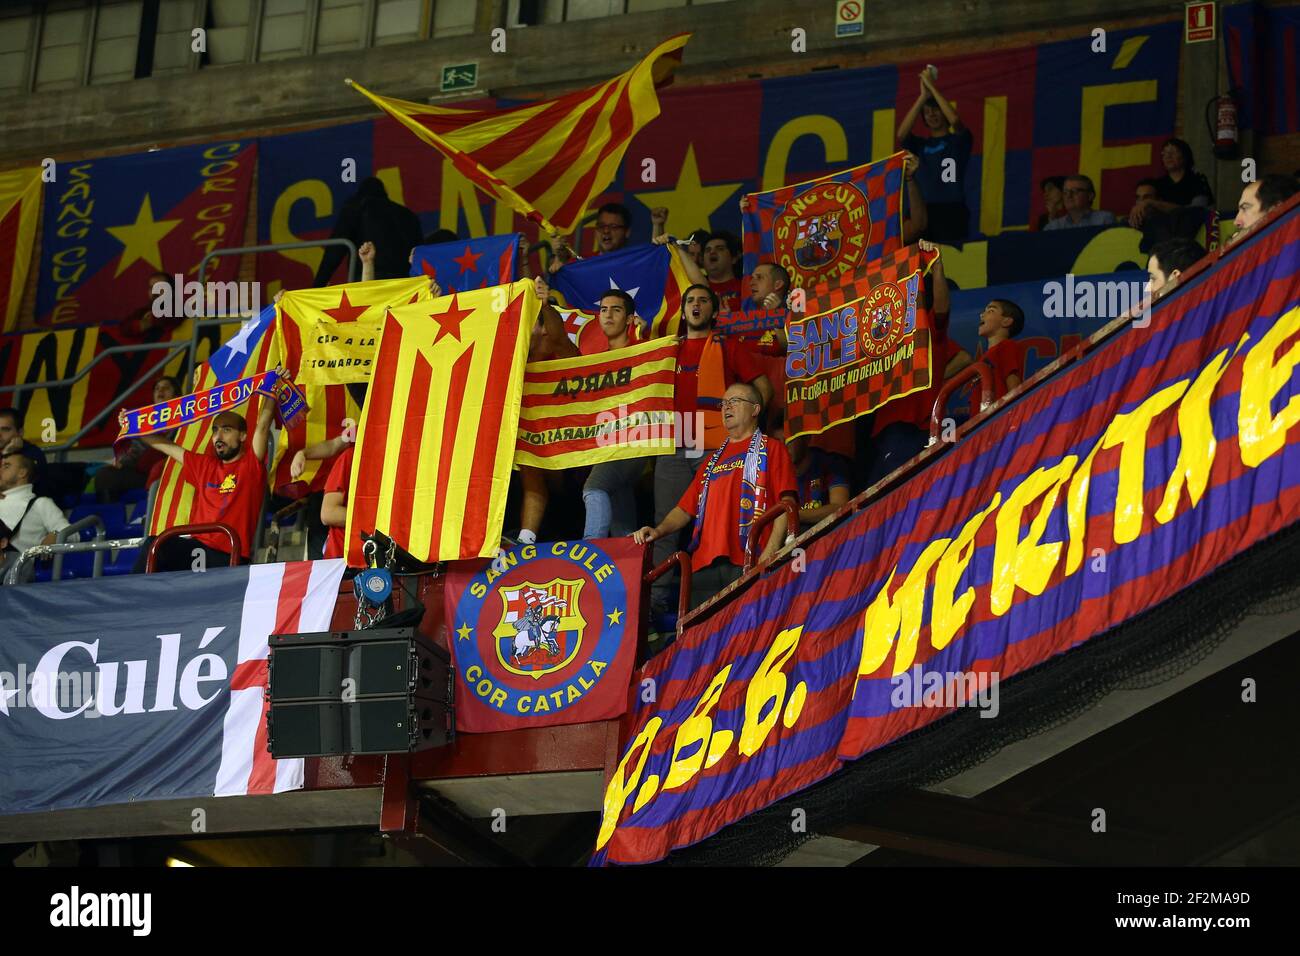 Fans of FC Barcelona show their support during the Euroleague basketball  match between FC Barcelona and Fenerbahce Ulker, at Palau Blaugrana in  Barcelona, Spain, on December 11, 2014. Photo Manuel Blondeau /